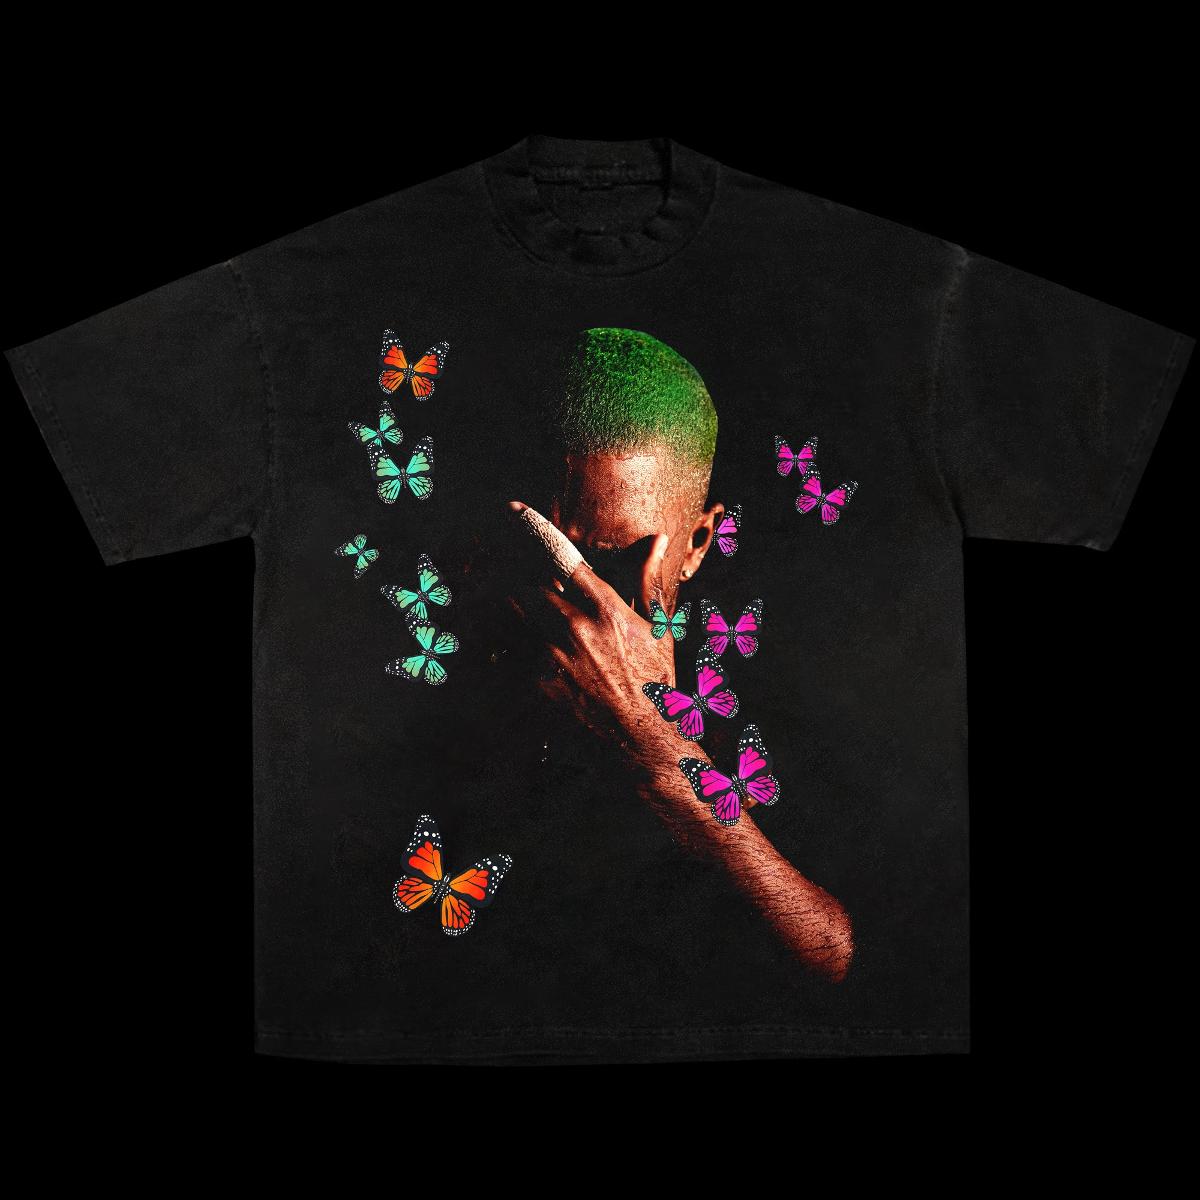 Frank Ocean Shirt Butterfly - Apparel, Mug, Home Decor - Perfect Gift For Everyone